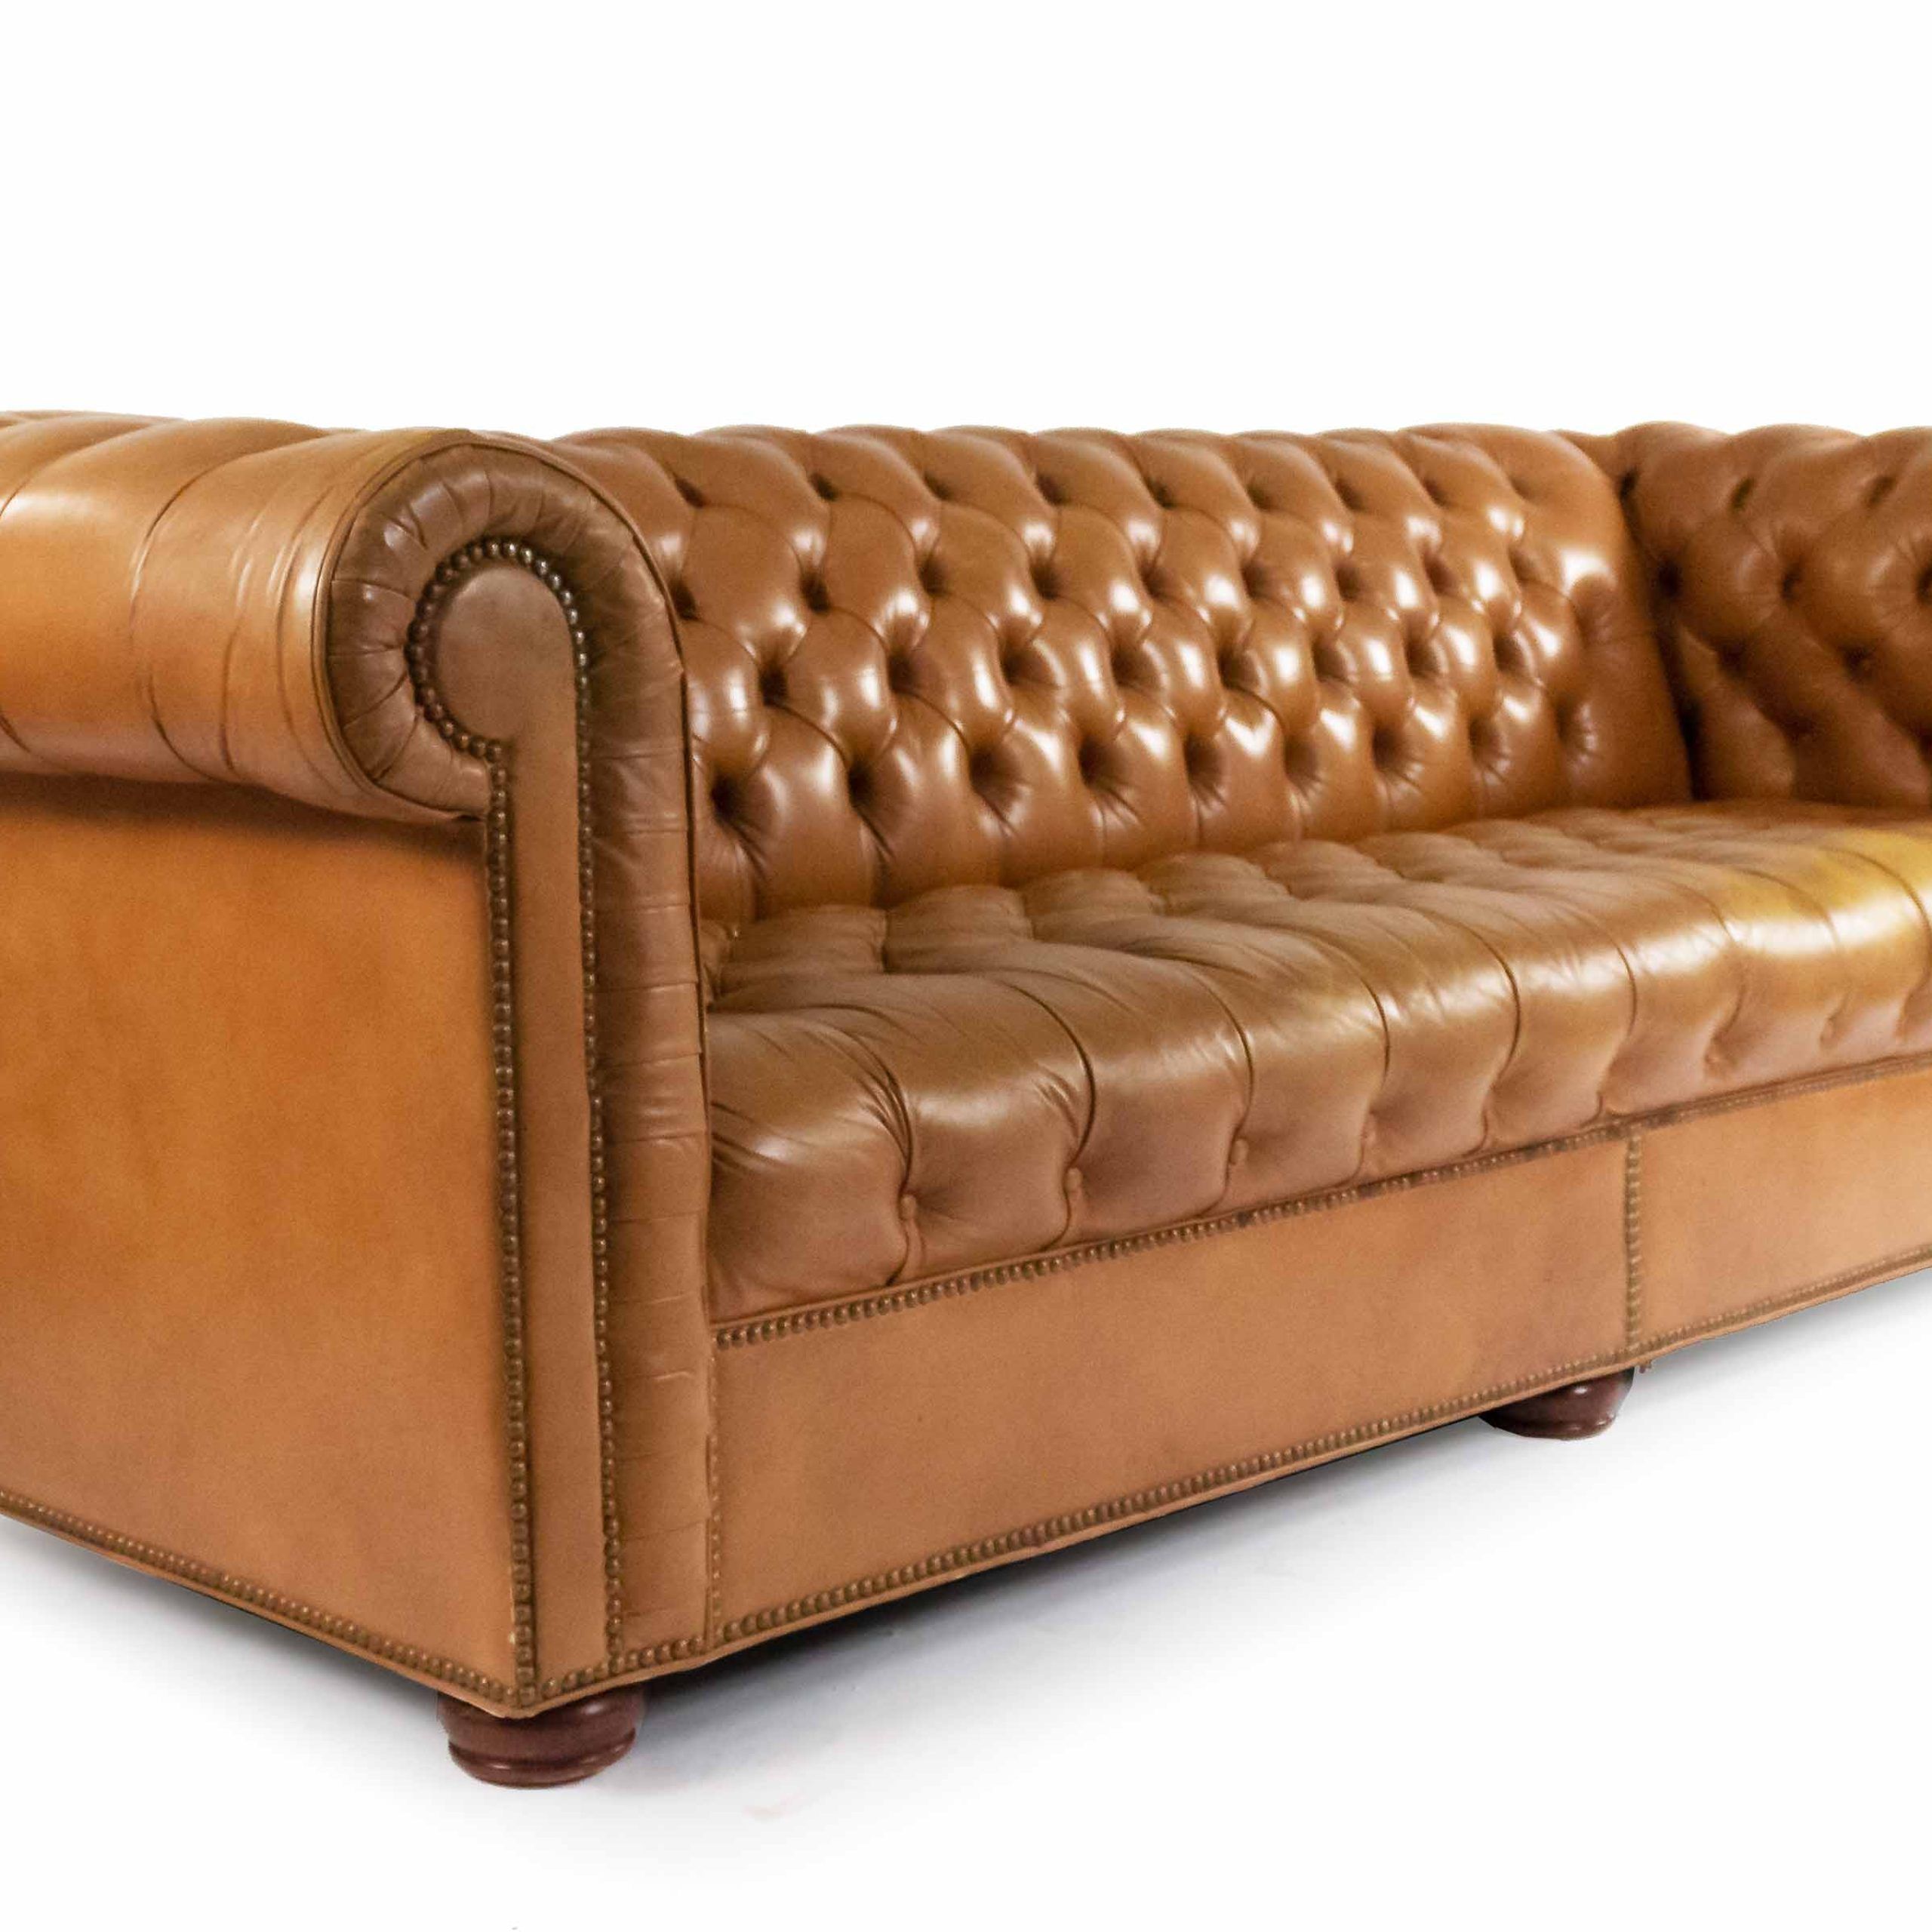 Tobacco Brown Leather Chesterfield Sofa Intended For Chesterfield Sofas (Gallery 6 of 21)